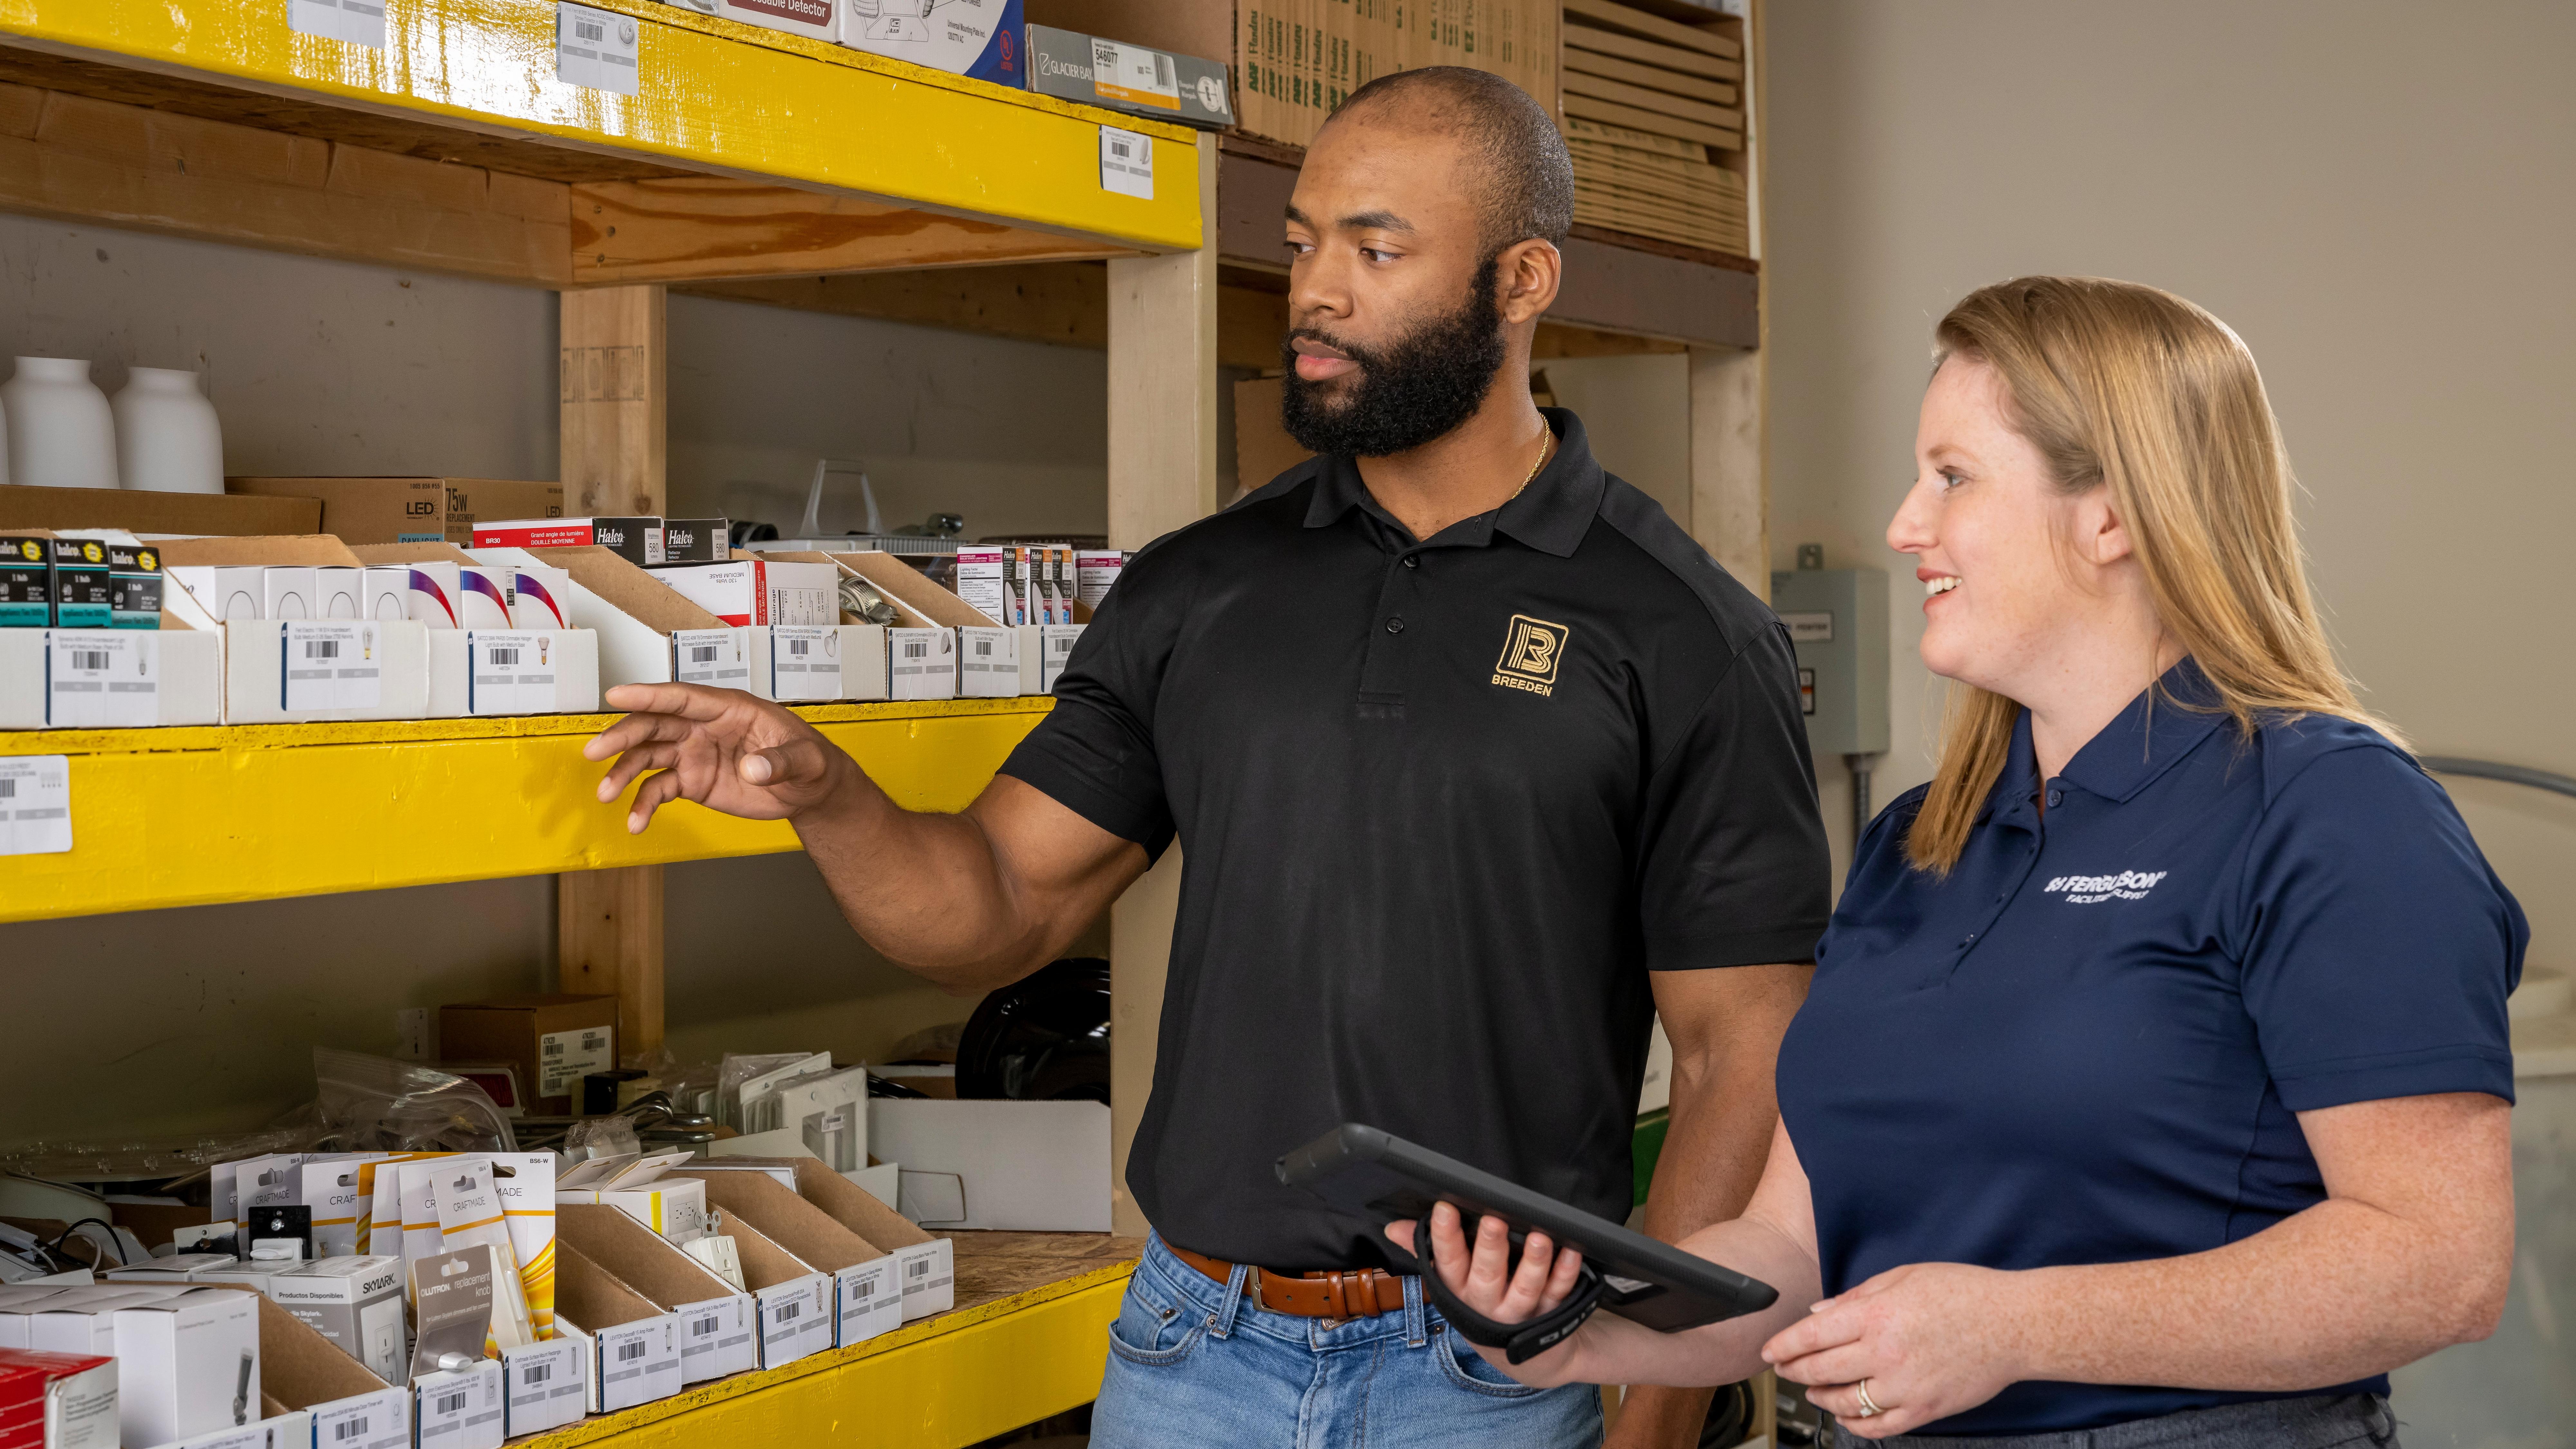 A Ferguson associate helps a facilities supply worker review his inventory on wooden shelves.